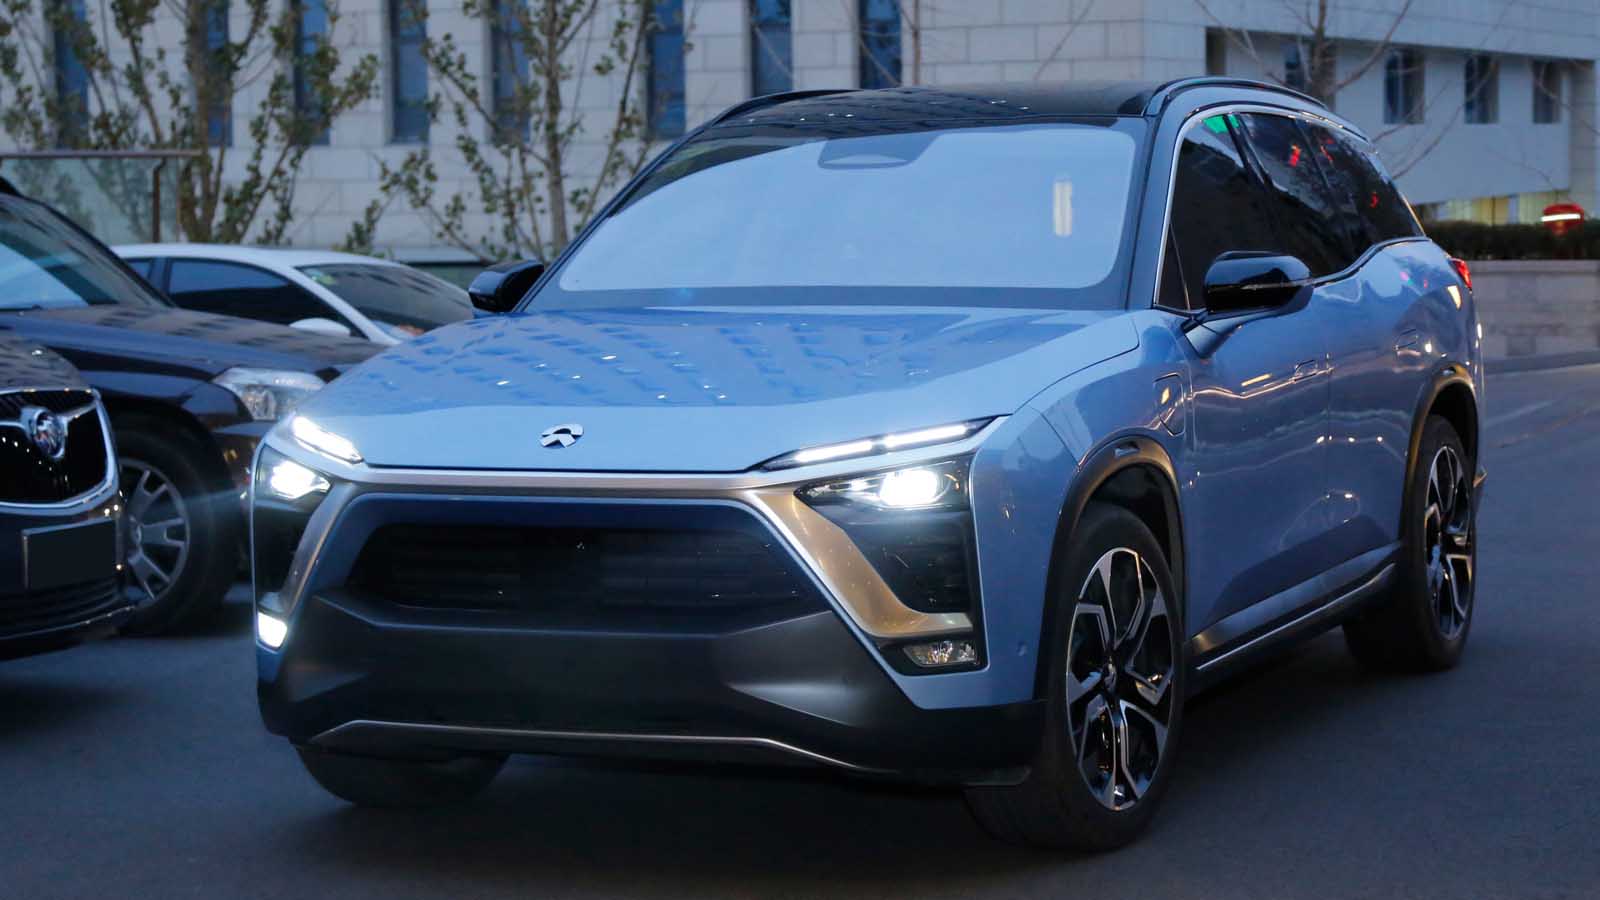 Why Nio Stock Looks Risky for Investors at Its Current Levels